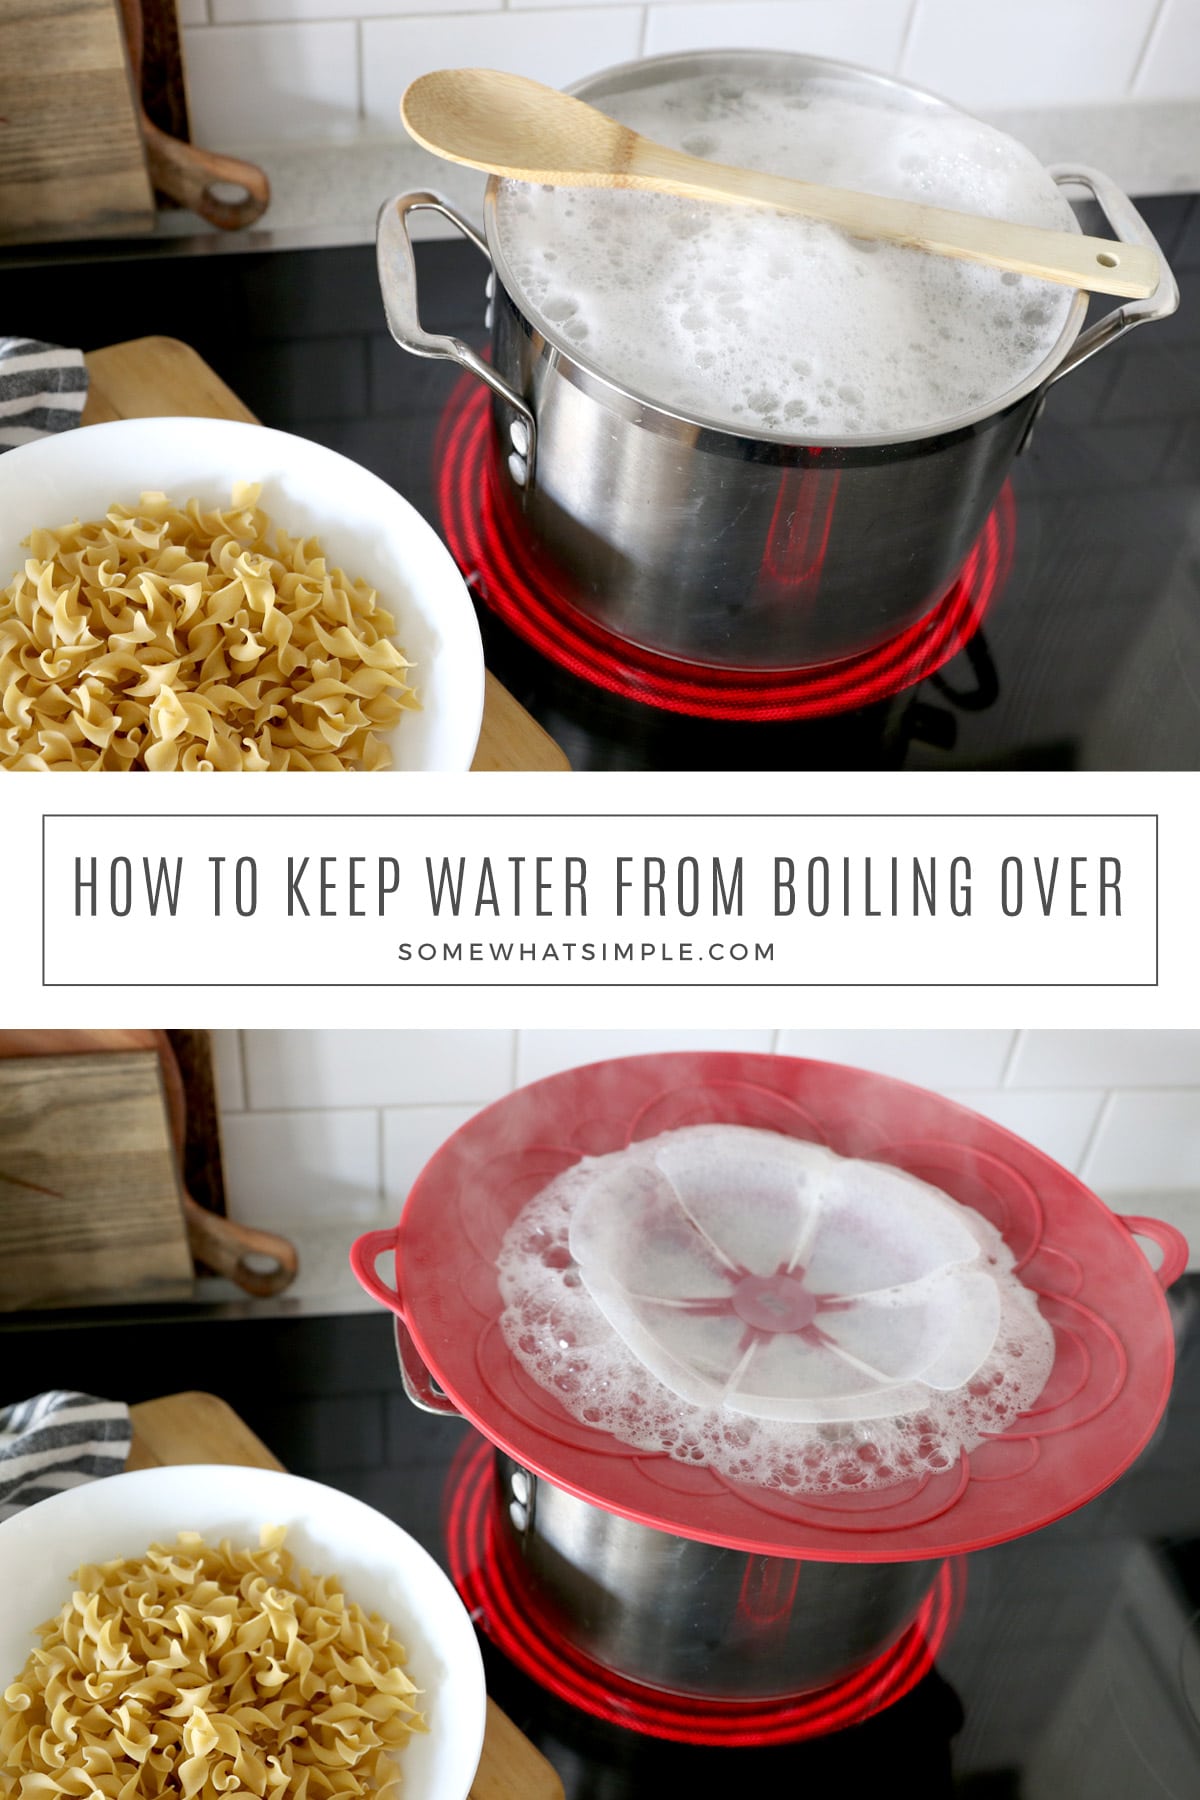 Sick of water spilling over the edge of the pot each time you make some pasta? Here are TWO simple methods to stop water from boiling over that just might change your life! via @somewhatsimple